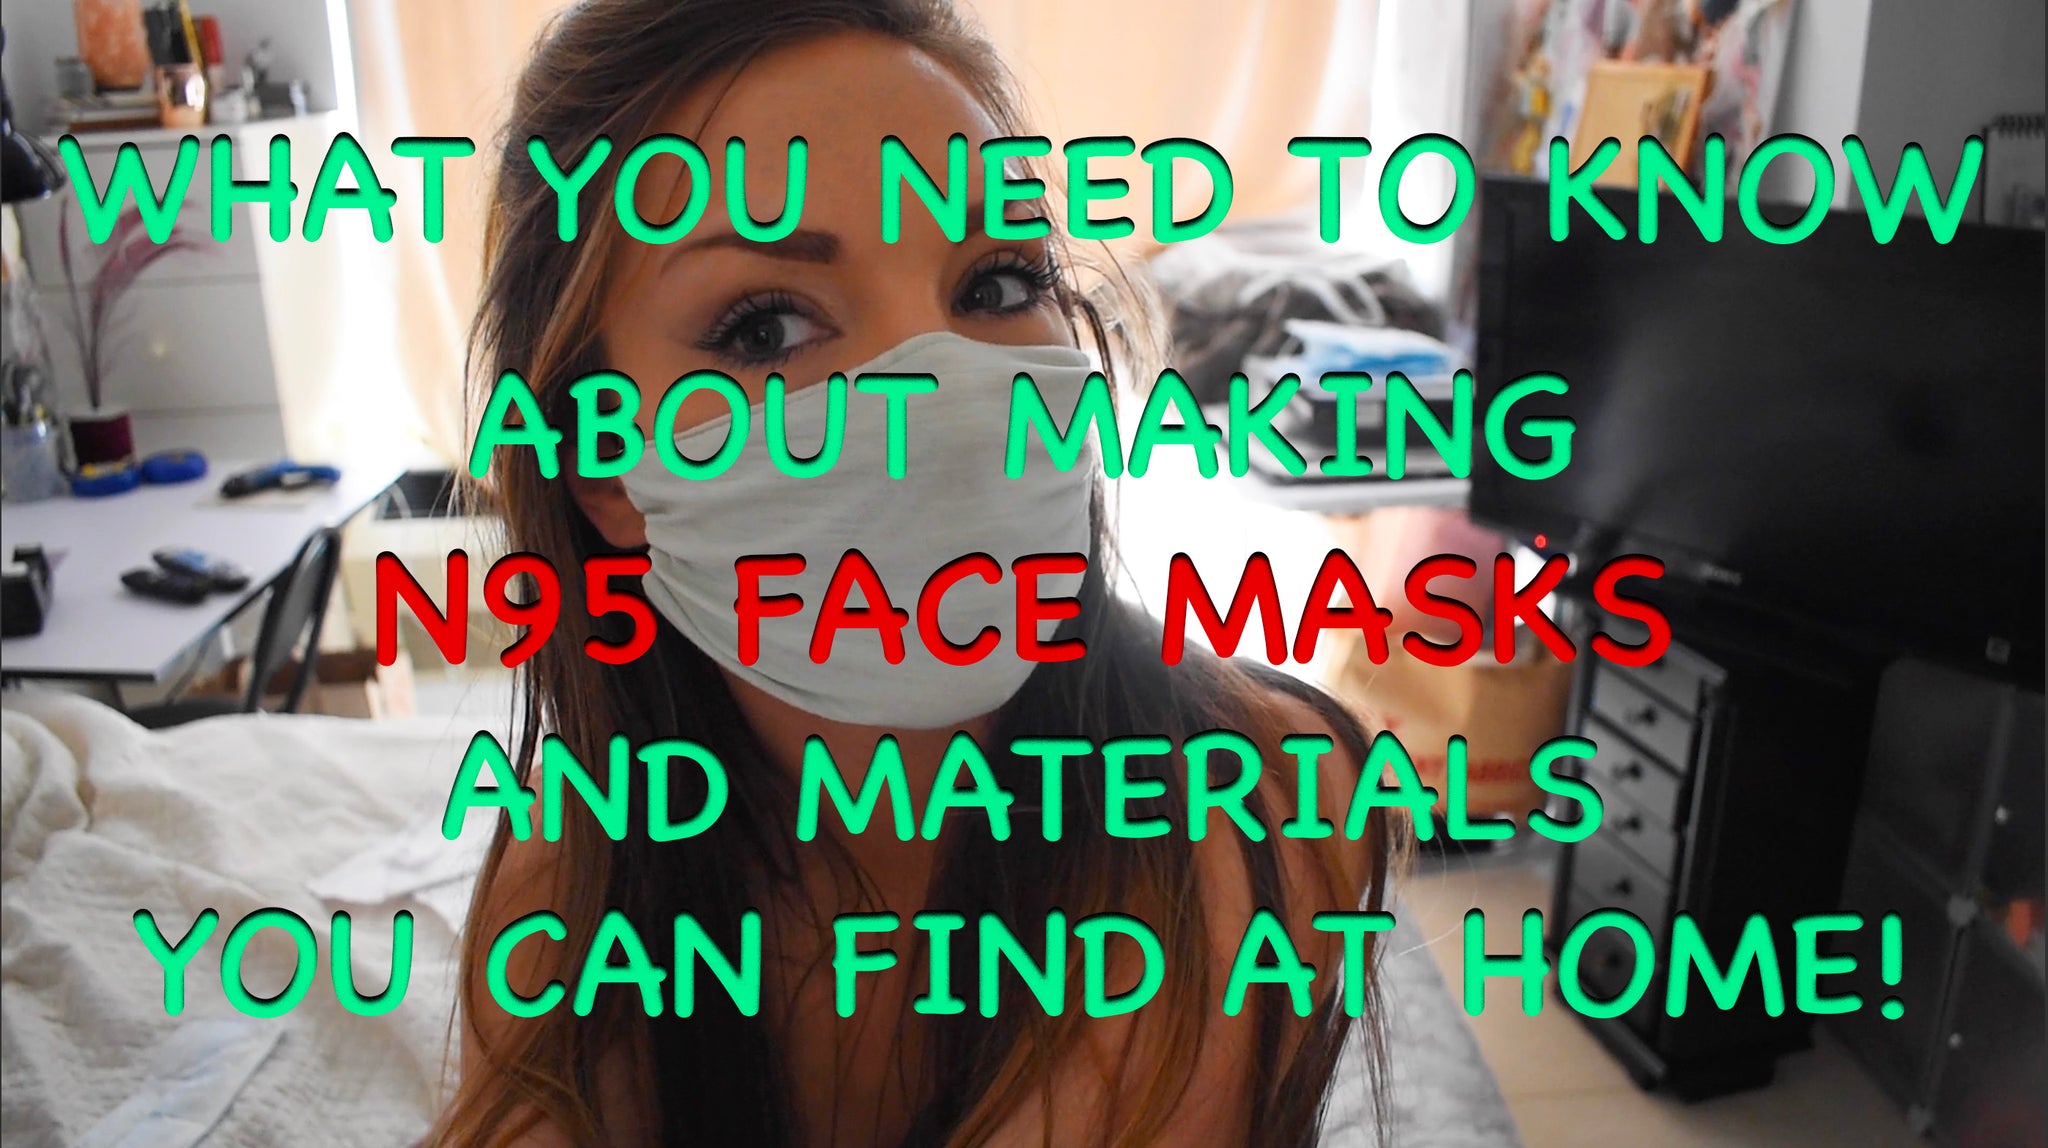 Xxx Bf Vies Does Mp3 Dotes - Make N95 Face Mask out of scientifically tested household material â€“  KxLNewYork